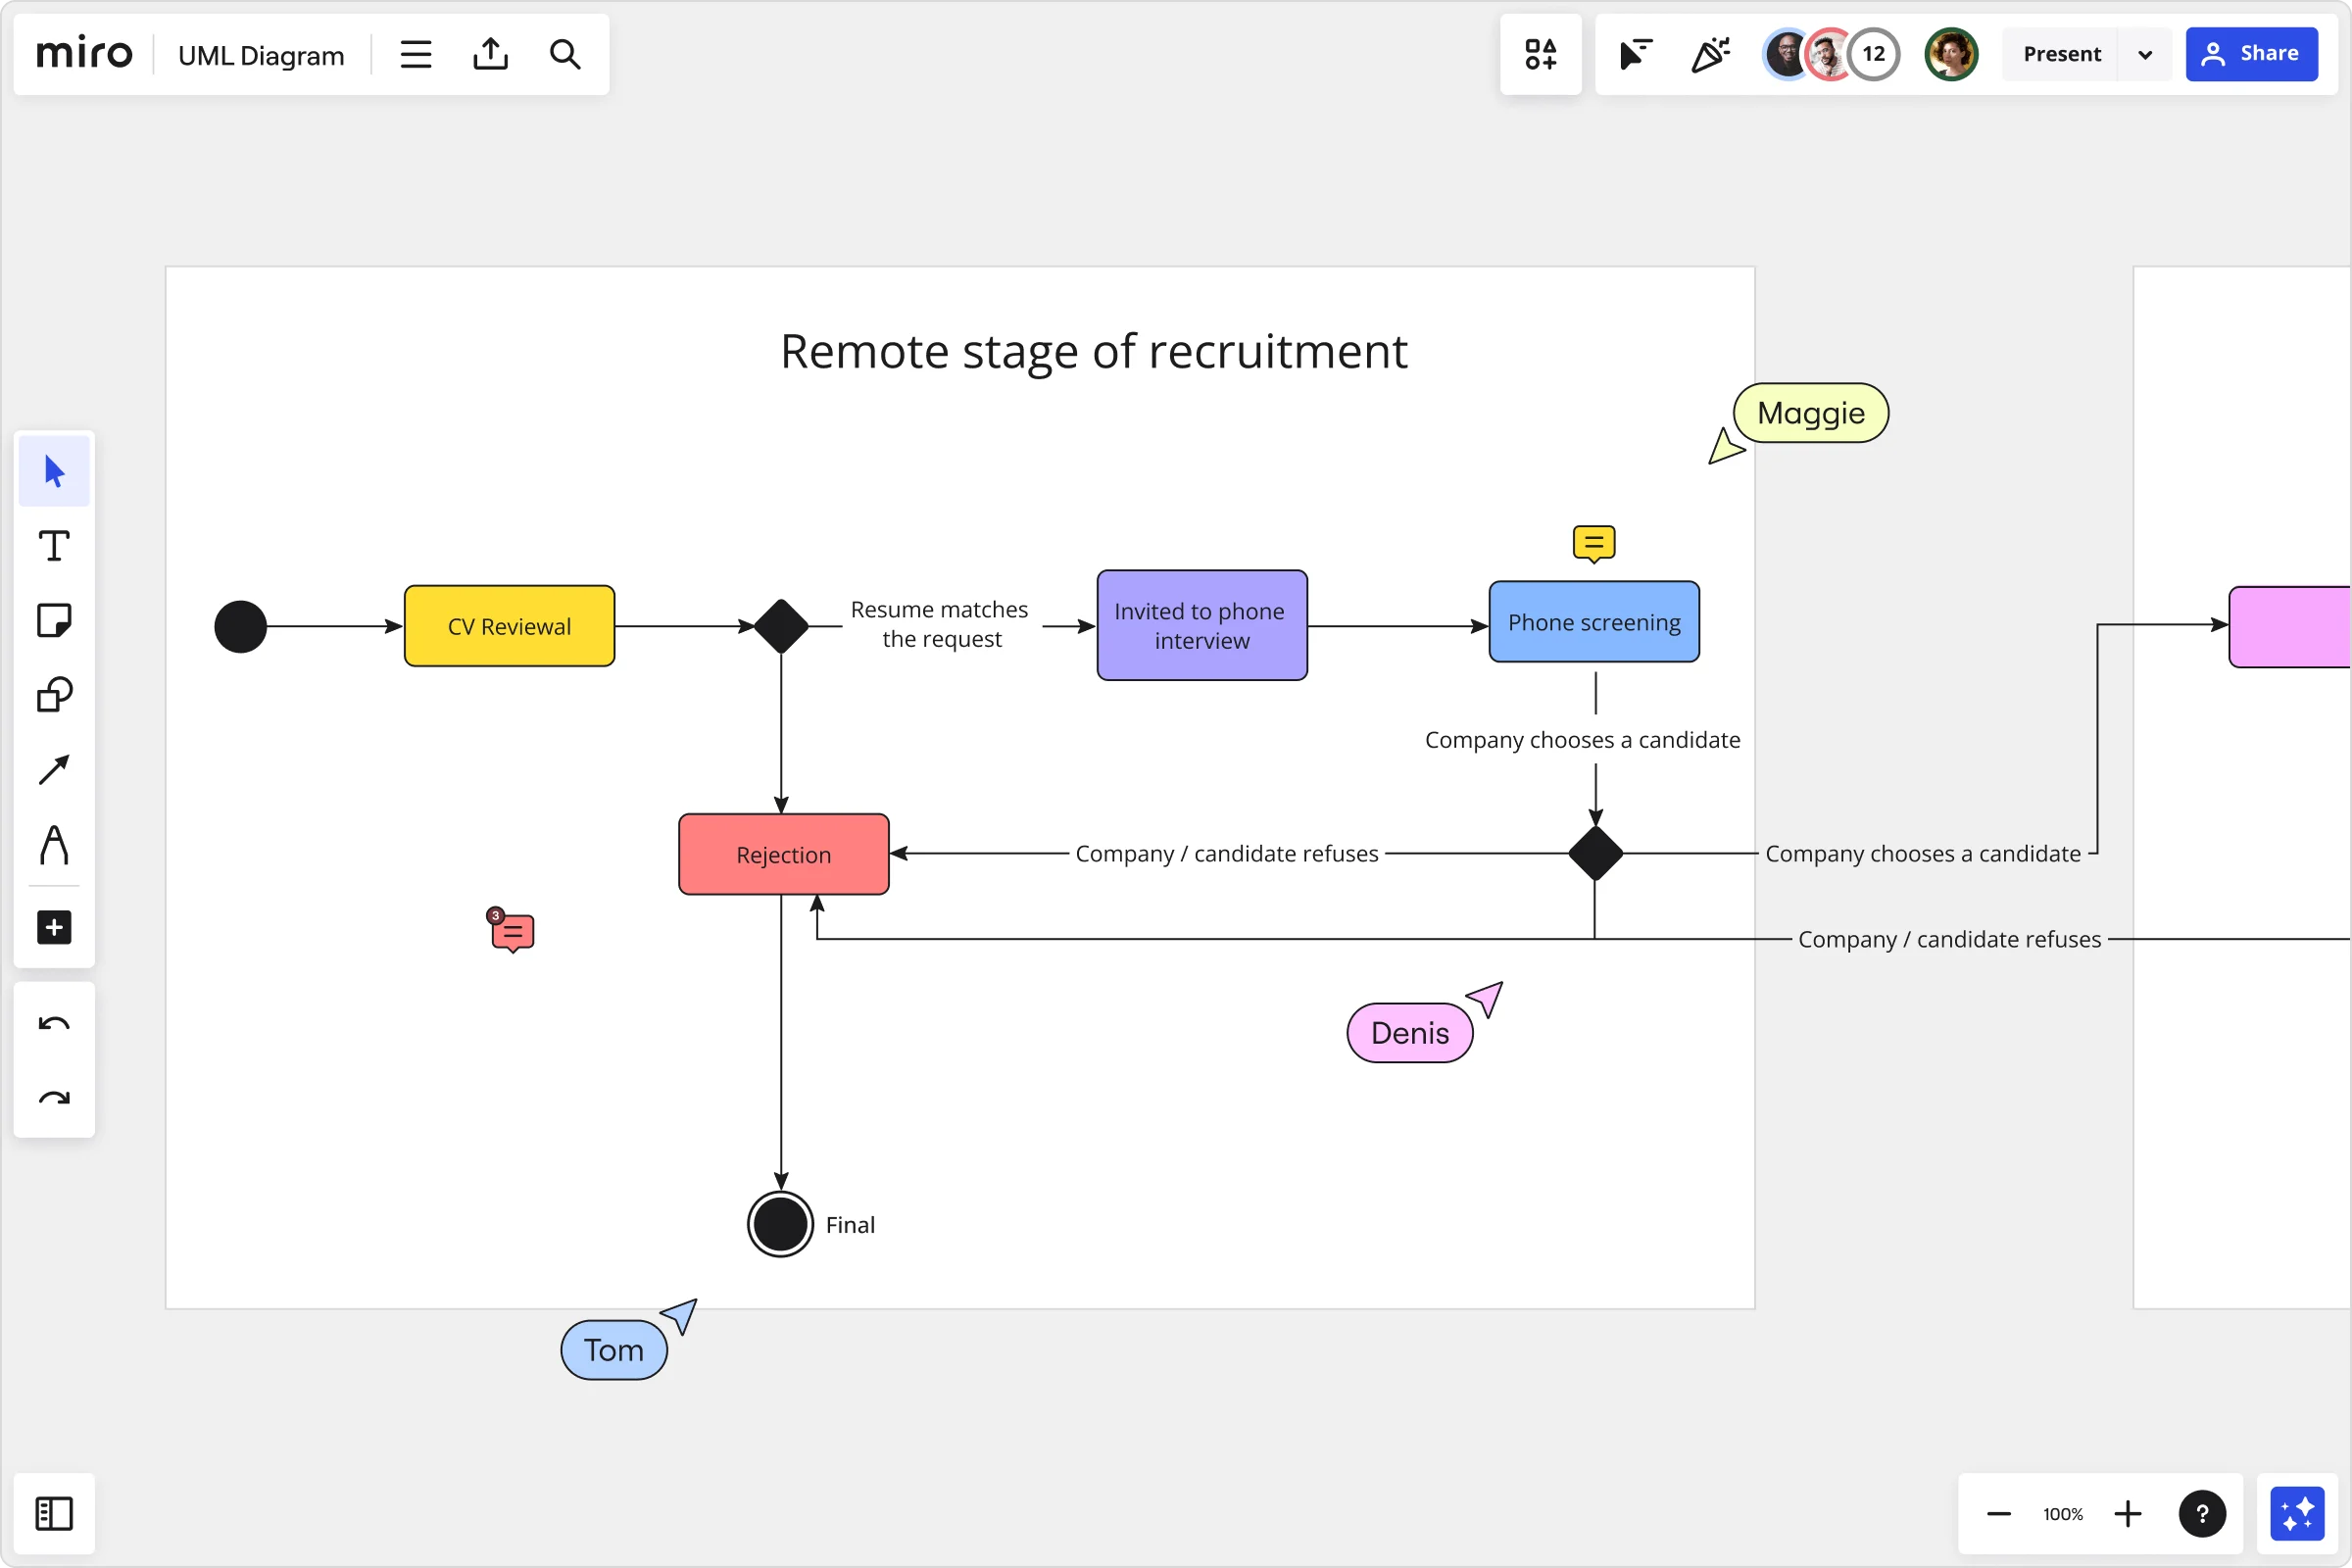 An image of an activity diagram made in Miro's activity diagram tool